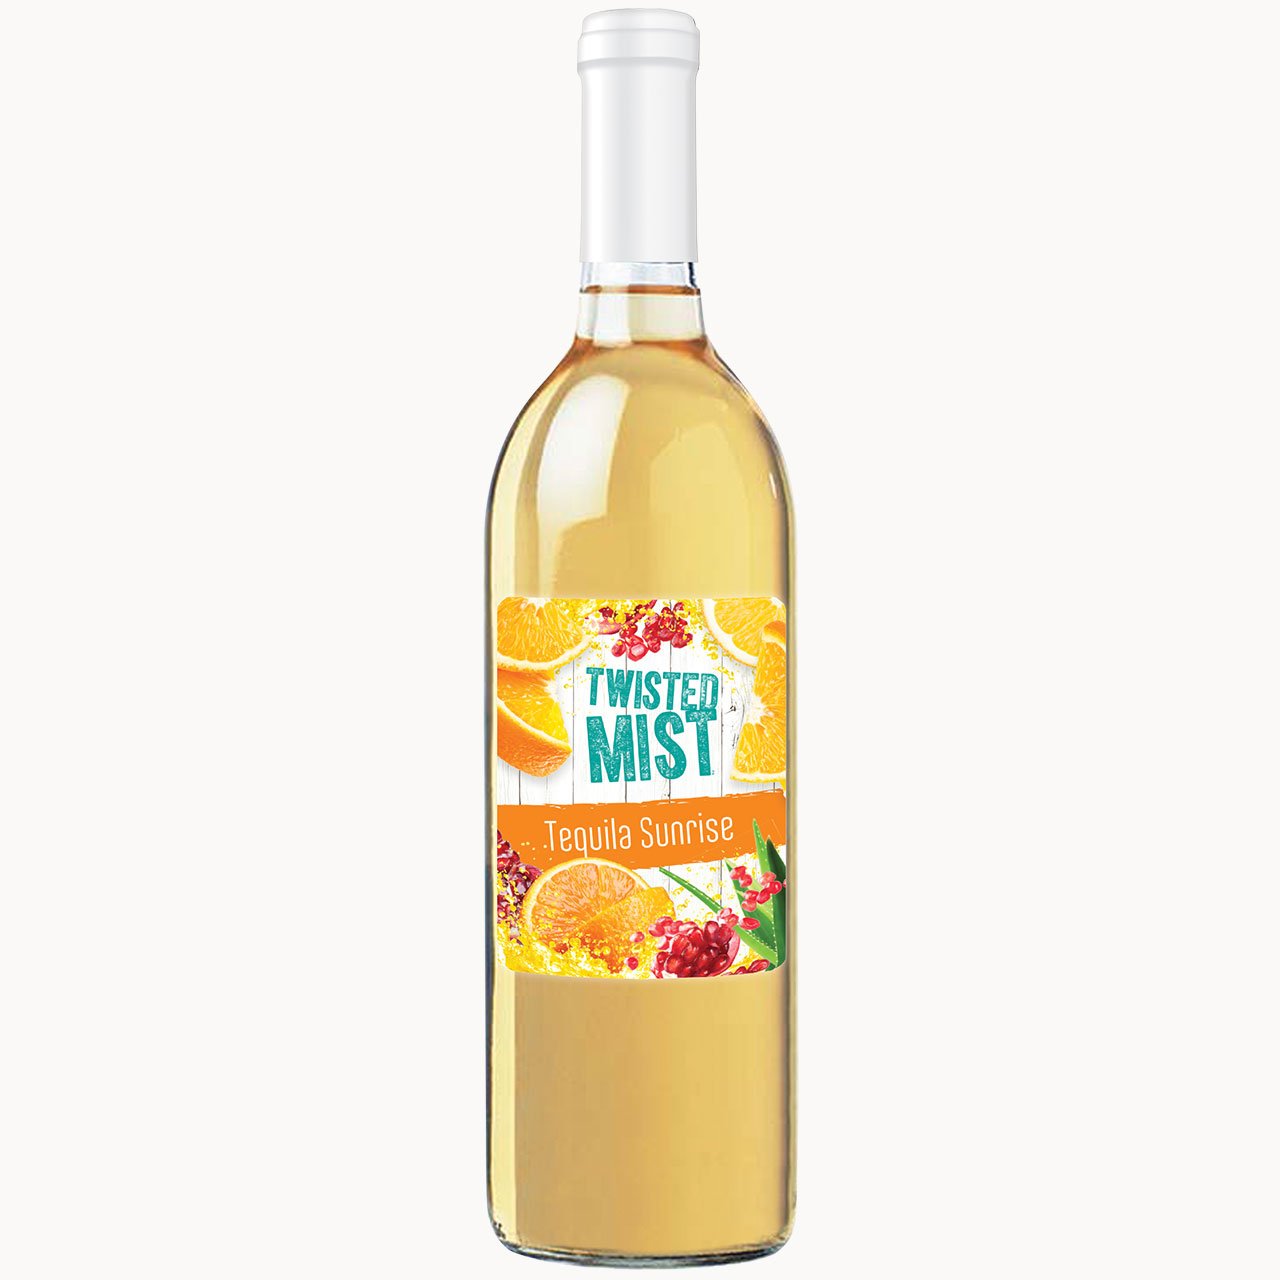 Winexpert Twisted Mist Tequila Sunrise - Limited Edition